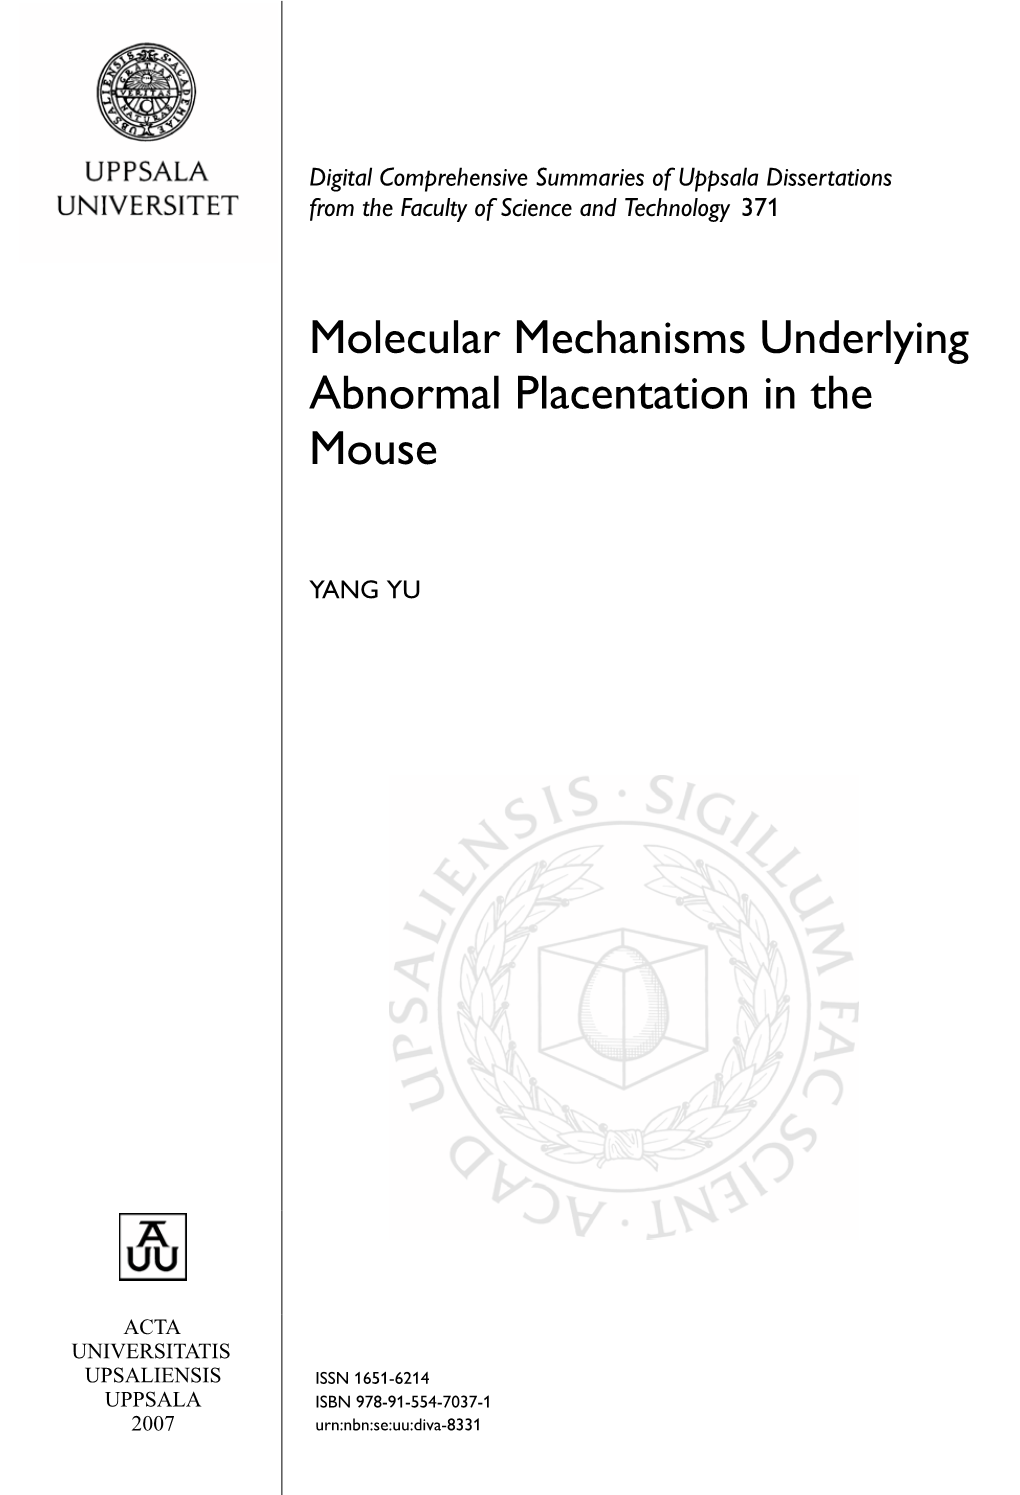 Molecular Mechanisms Underlying Abnormal Placentation in the Mouse